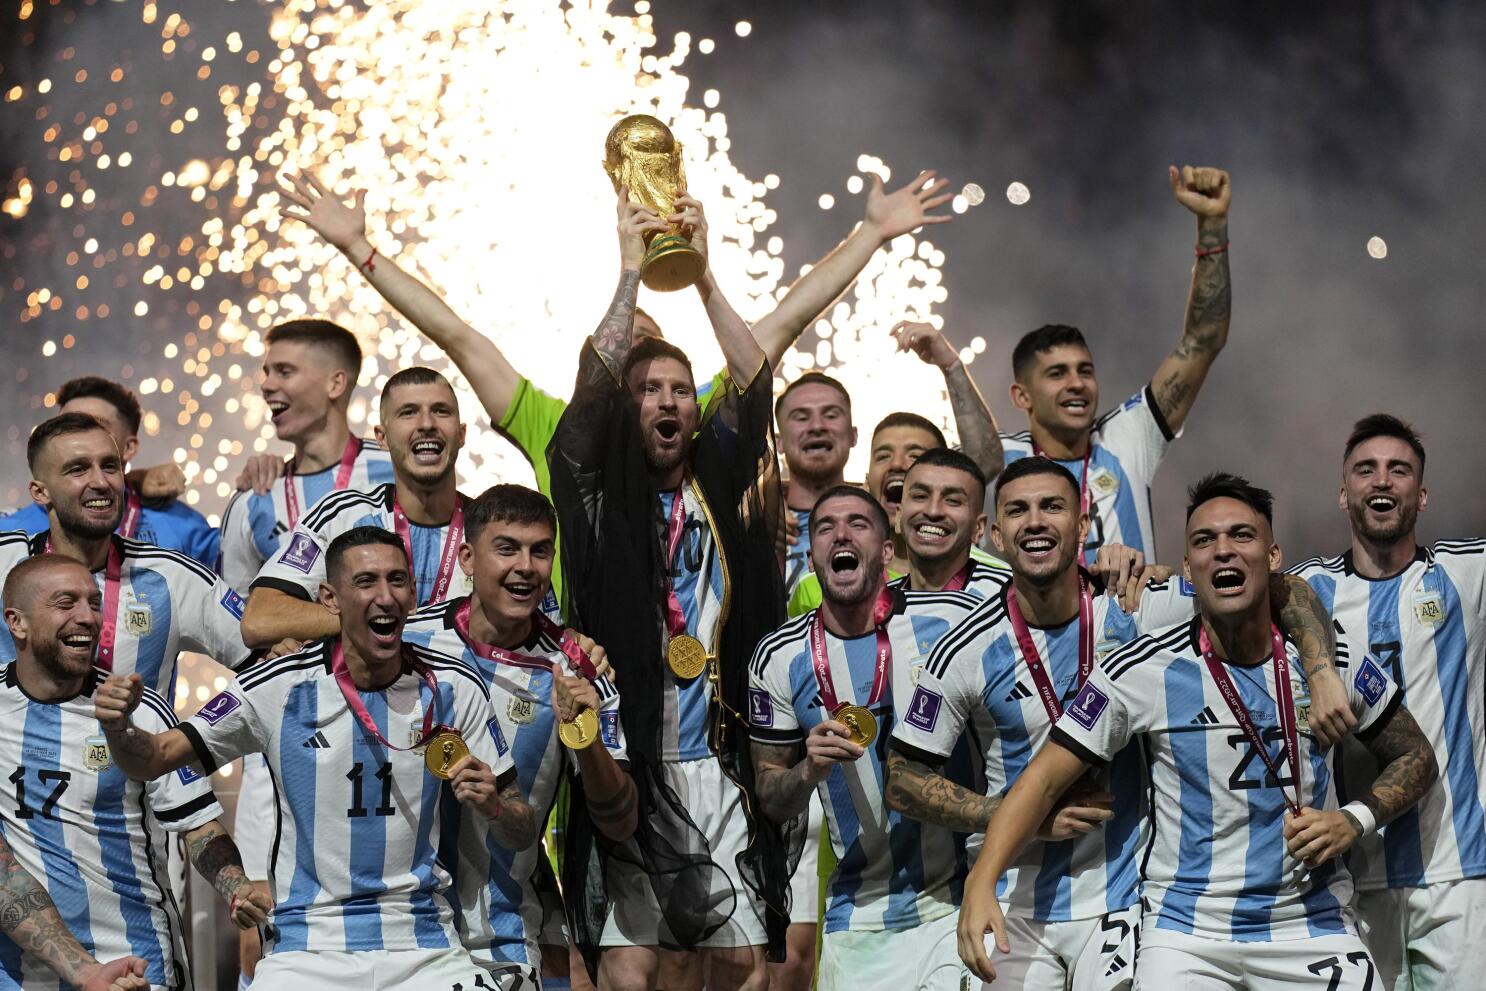 FIFA: 2026 World Cup to have 4-team groups, 48 teams, 104 games